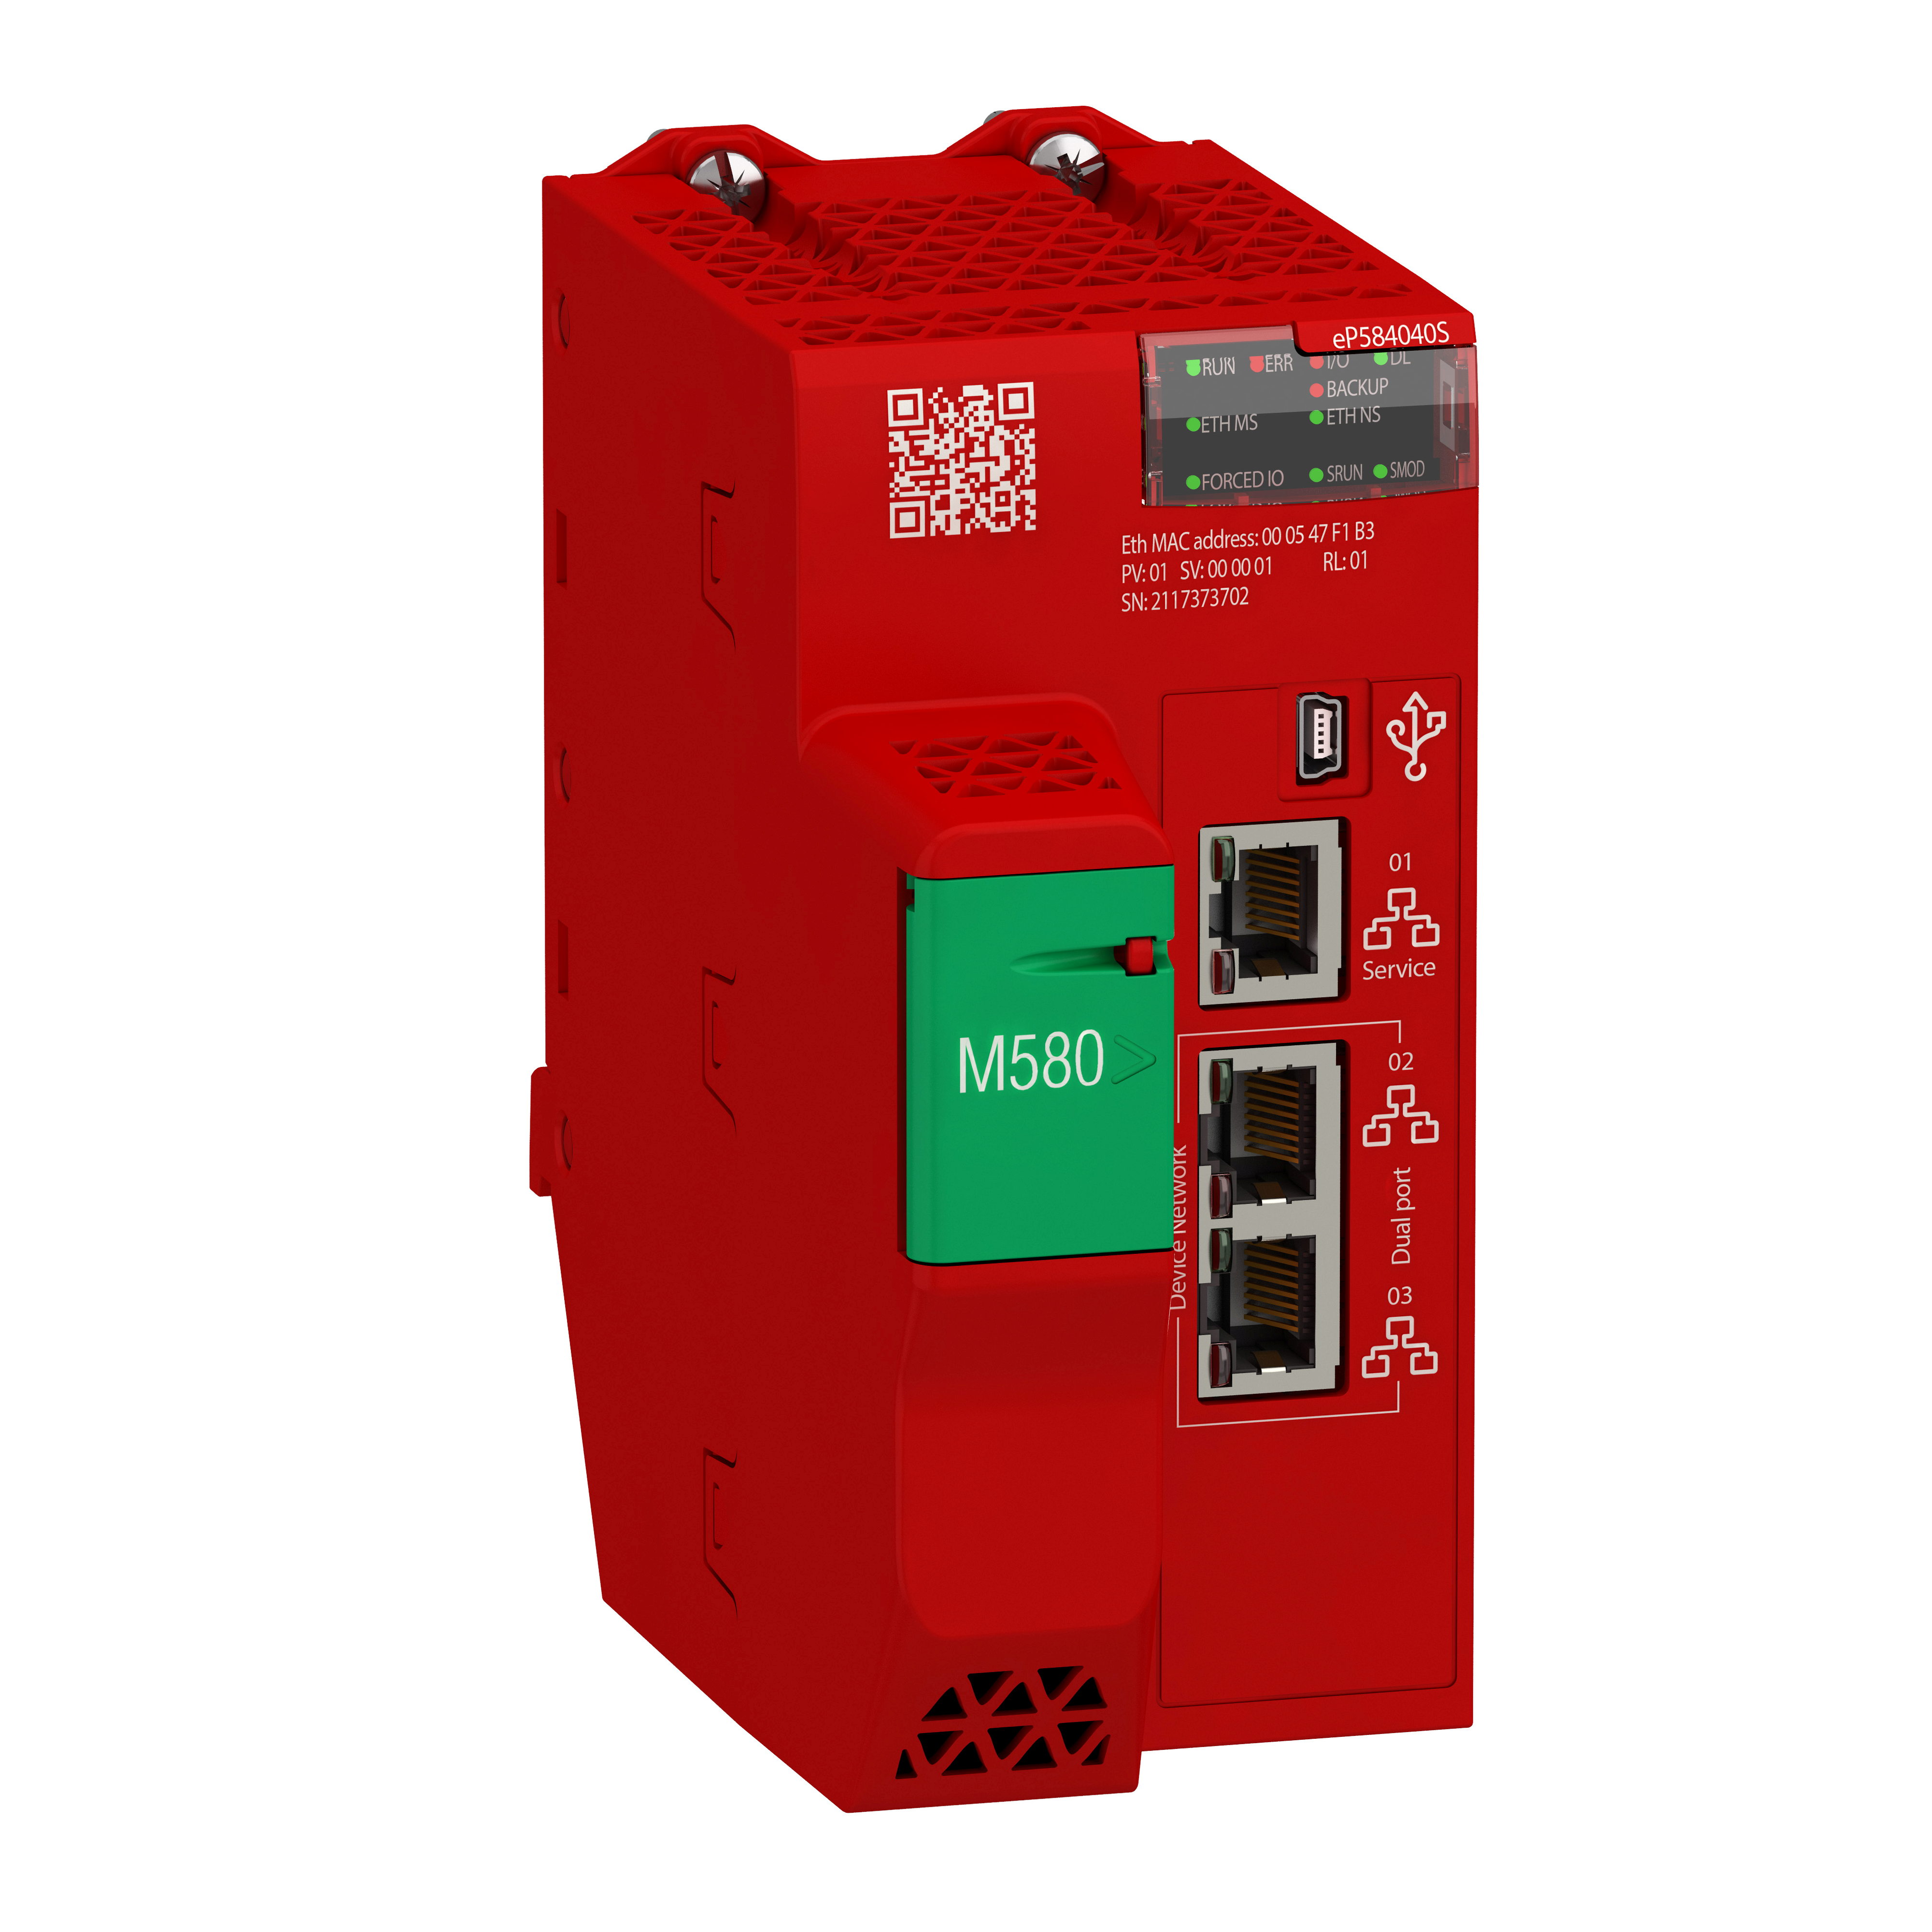 standalone safety processor, Modicon M580, 16MB, 61 Ethernet devices, 16 remote IO racks of X80 and Quantum, 64 CIP safety devices